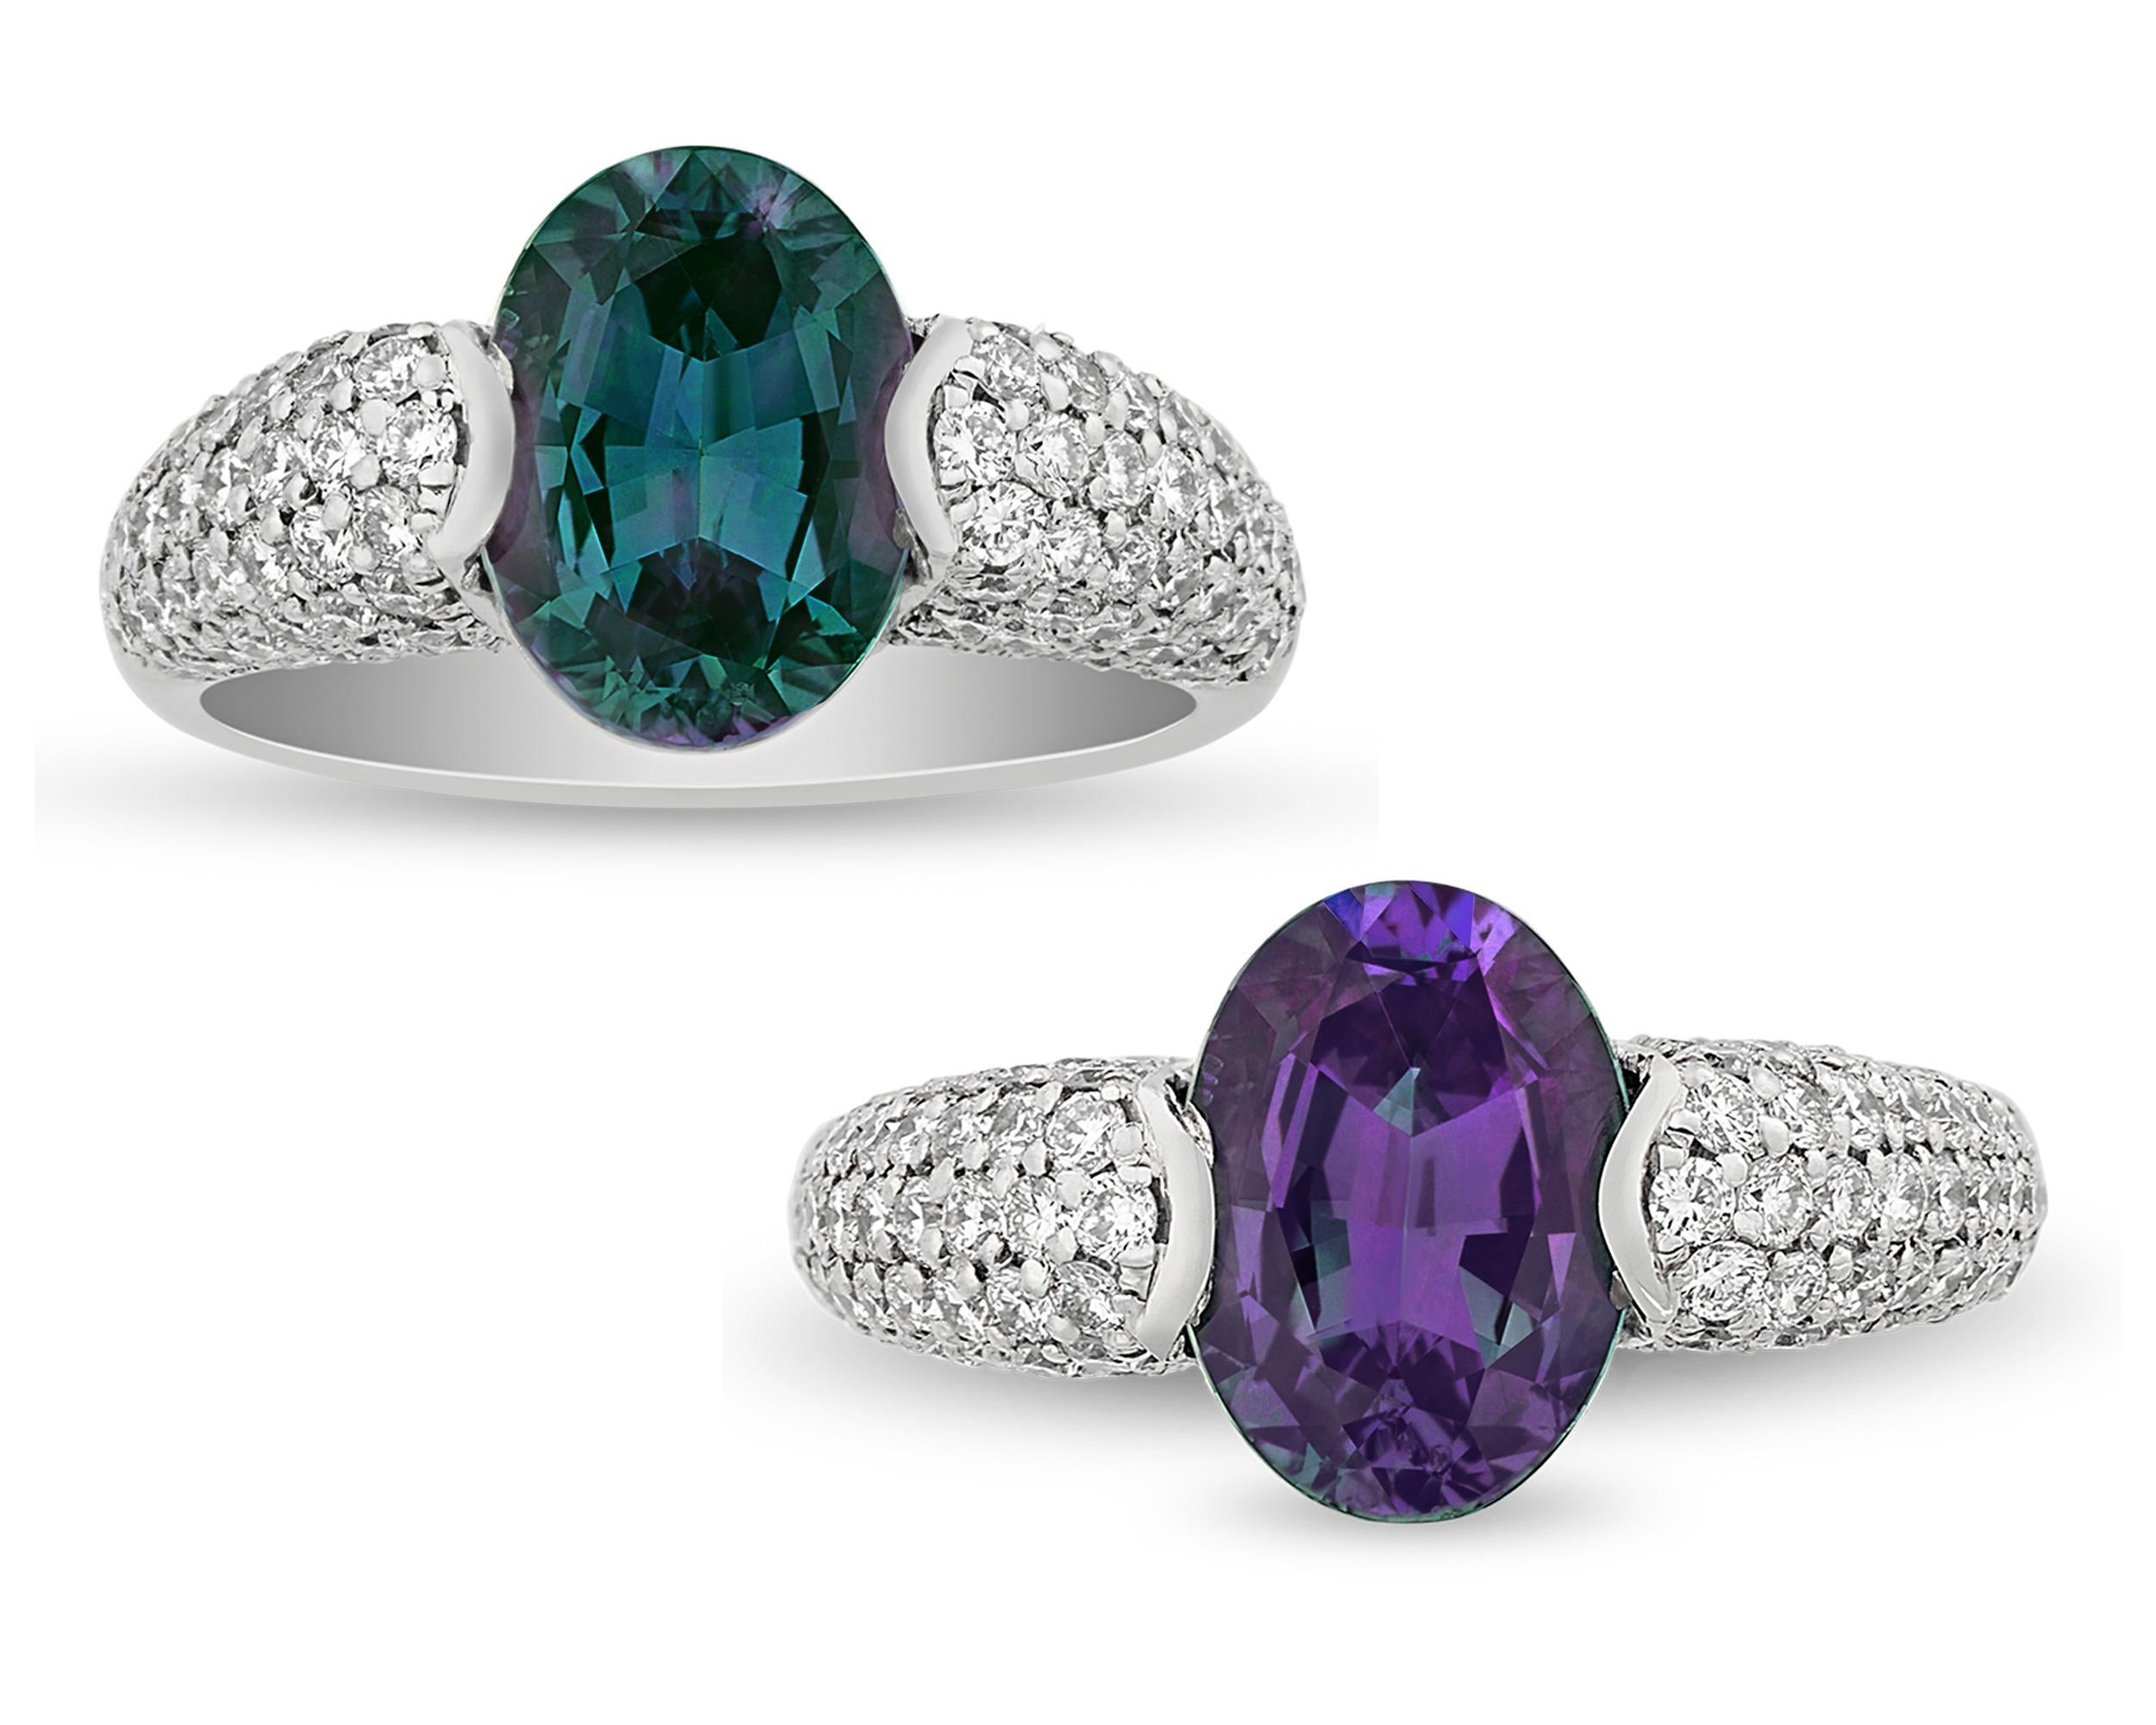 Possessing the remarkable ability to change colors, the enchanting 2.73-carat Brazilian alexandrite in this ring displays a blue-green hue under white light and changes to a rich purple in incandescent light. Certified by the Gemological Institute